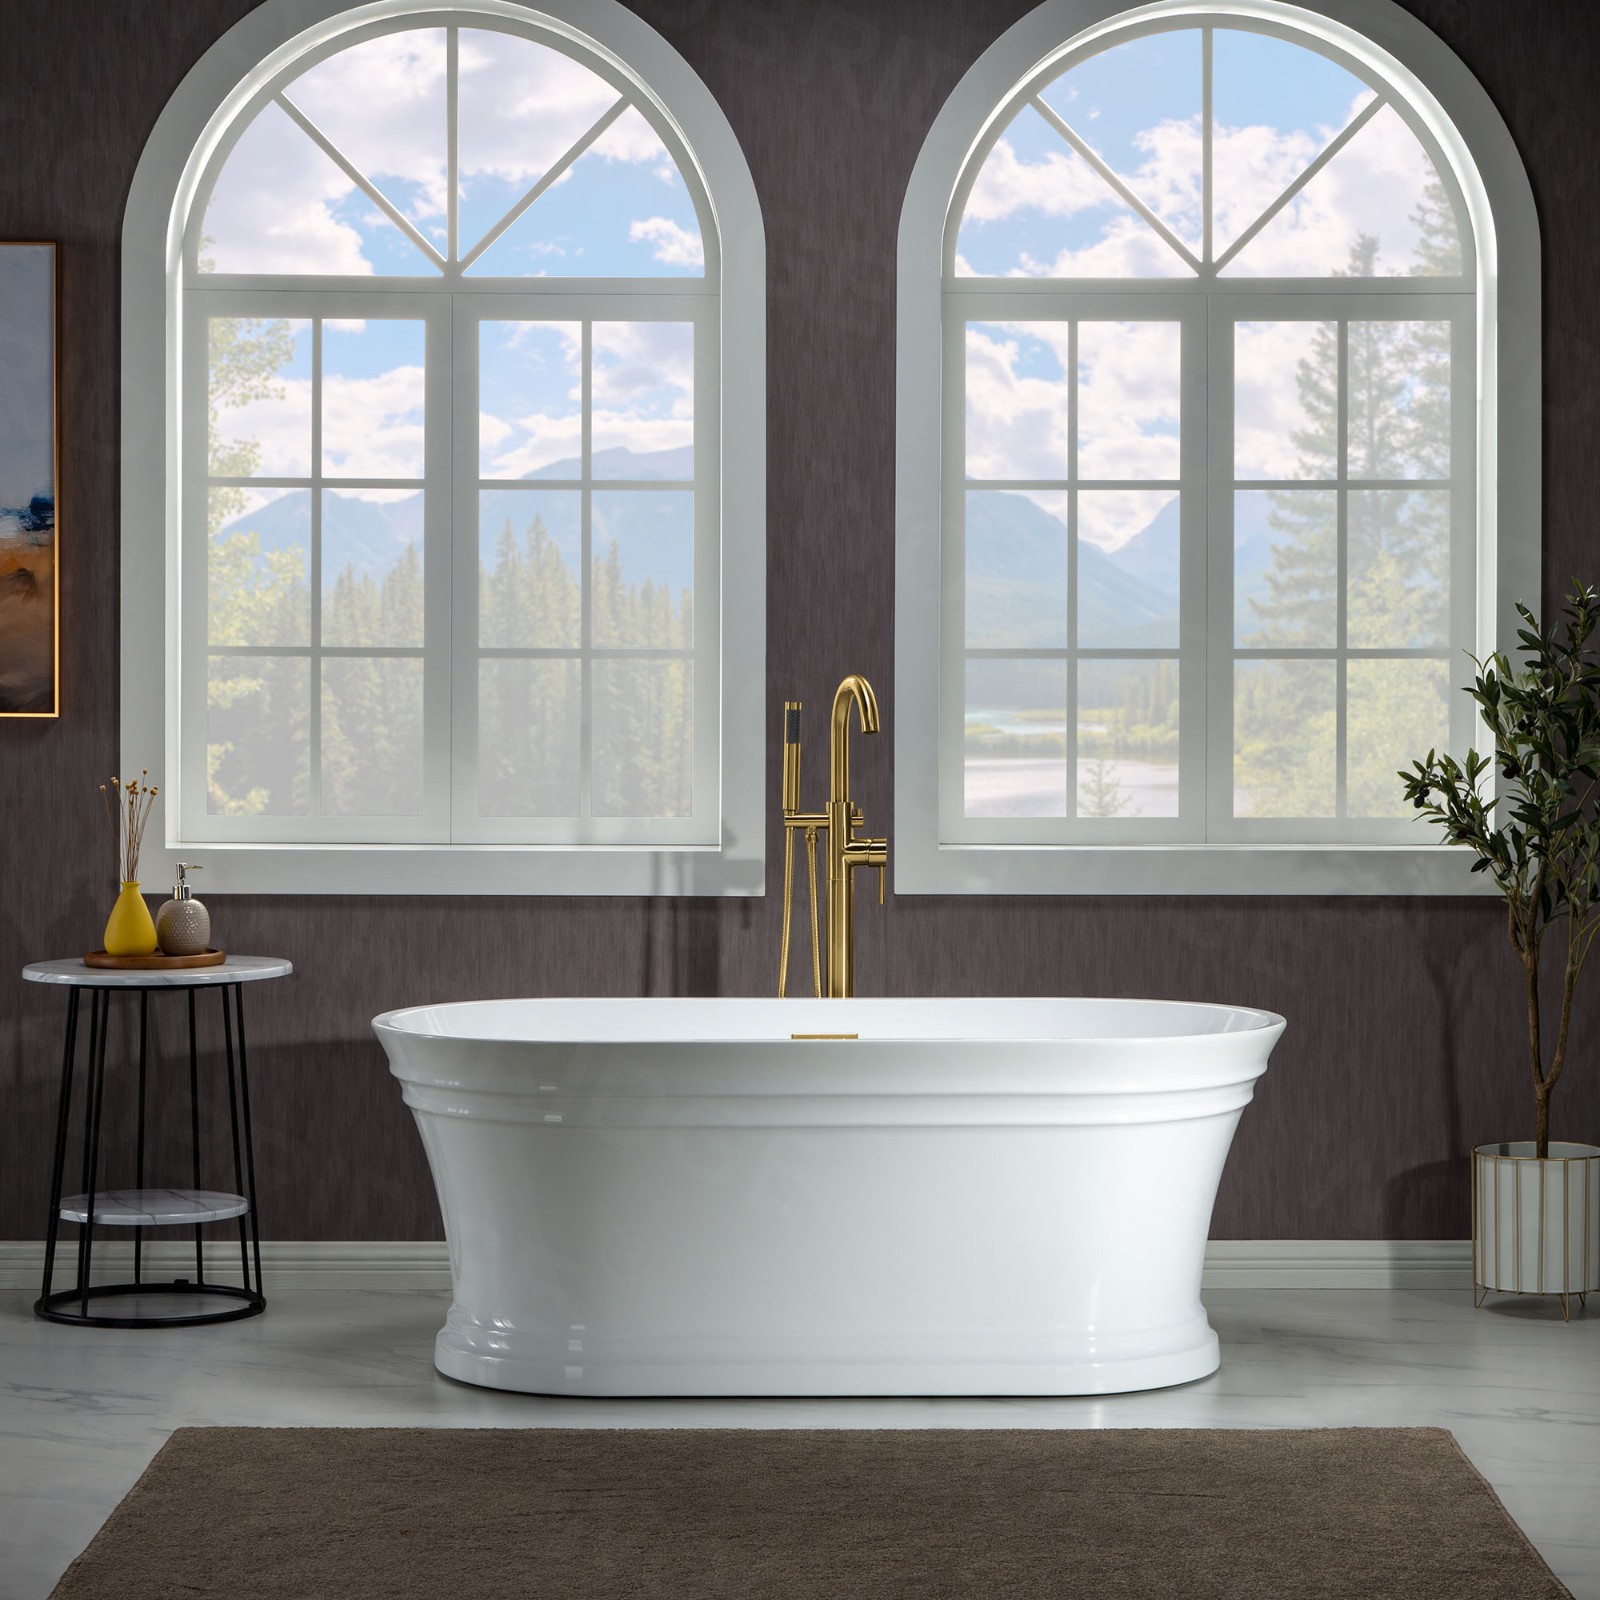  WOODBRIDGE 67 in. Freestanding Double Ended Acrylic Soaking Bathtub with Center Drain Assembly and Overflow, BTA1537/B1537, Glossy White_7702